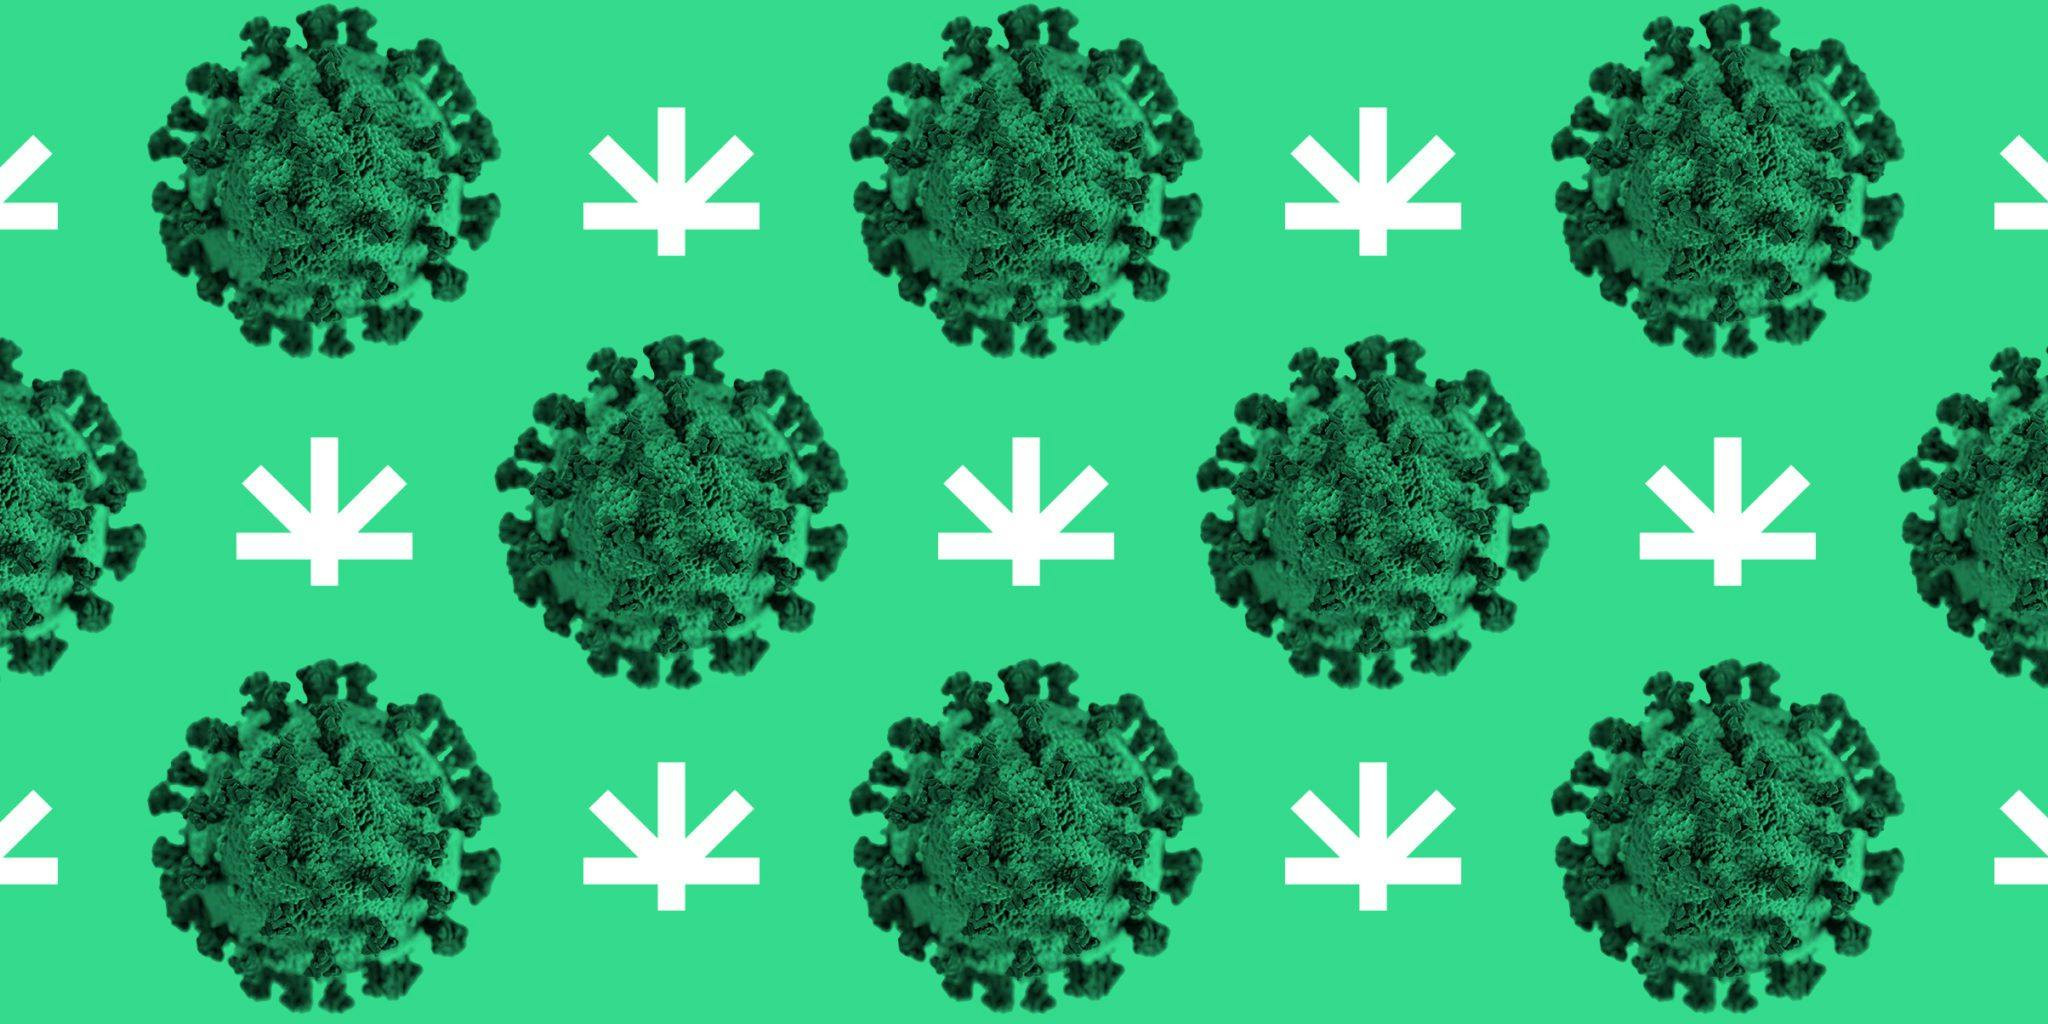 COVID-19 virus on the green bg with Leafwell logo